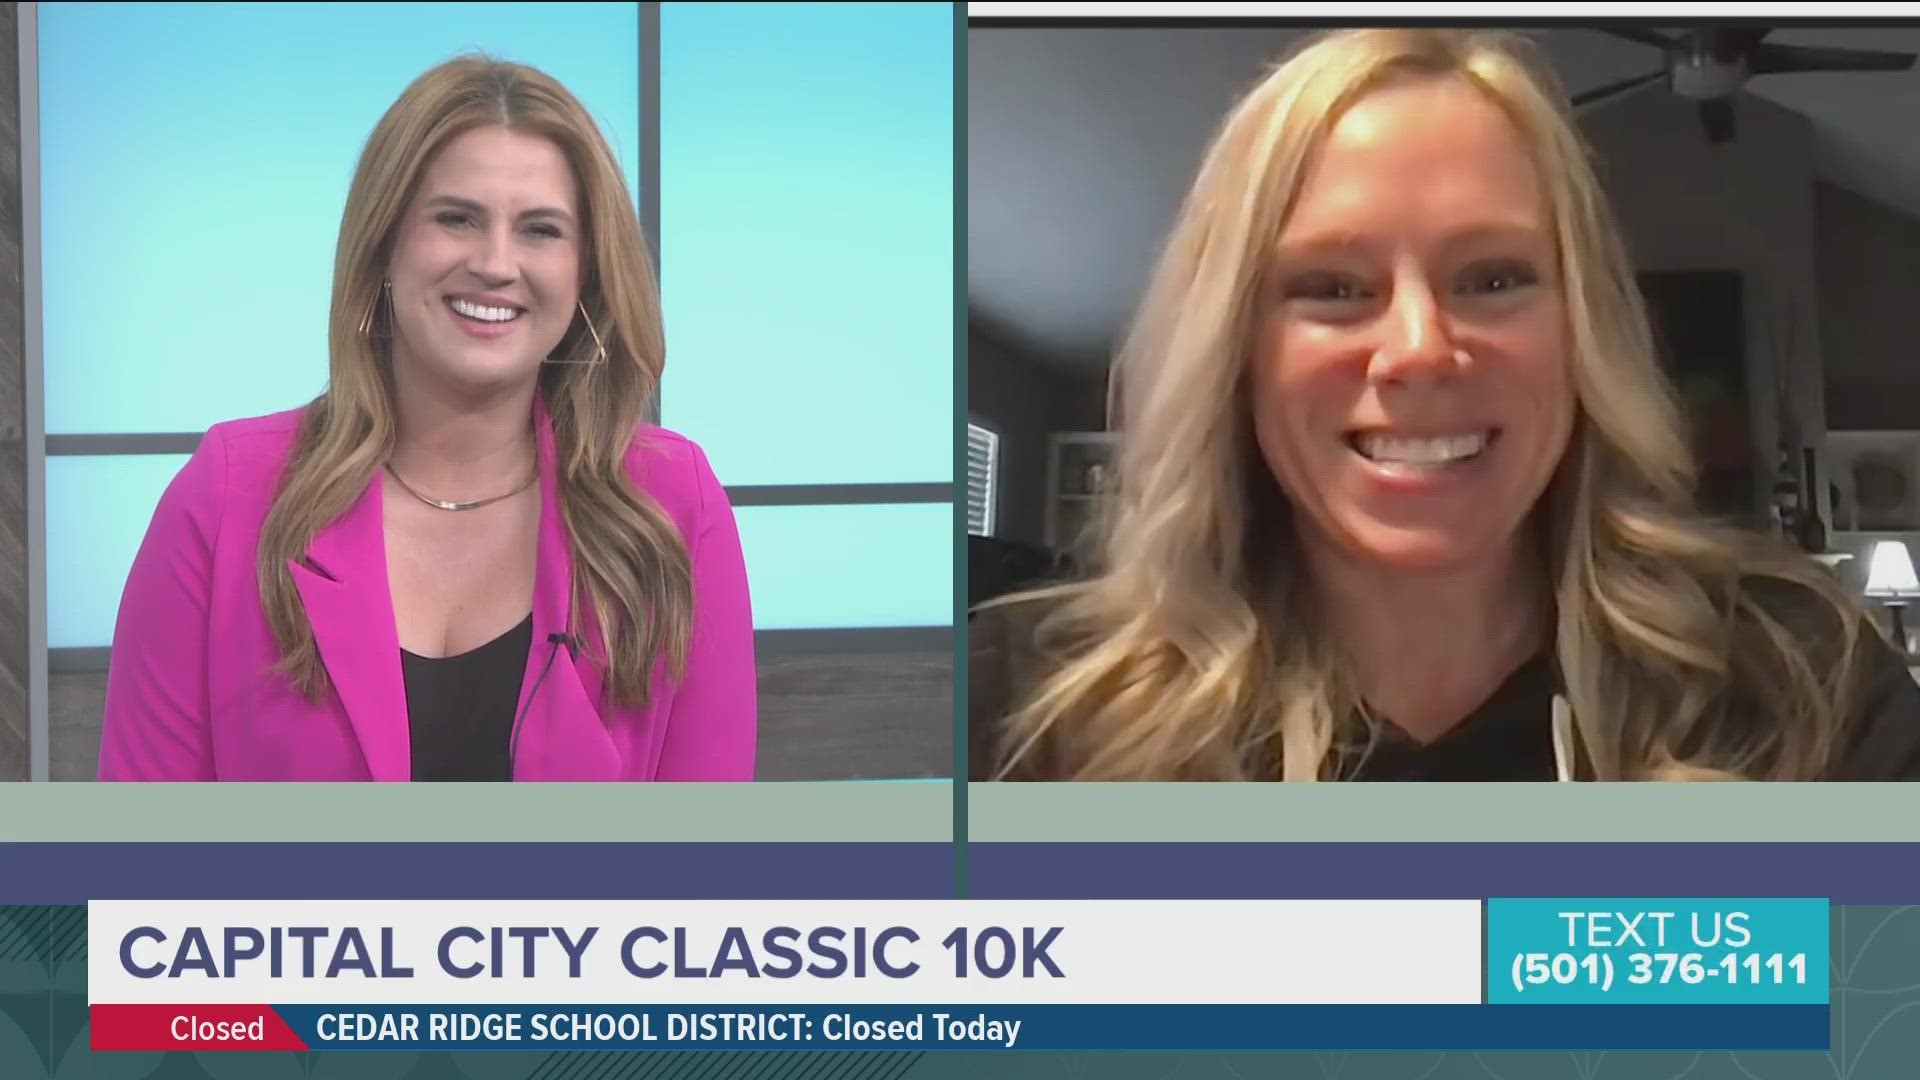 Leah Thorvilson with the Little Rock Roadrunners to tells us about an upcoming race, the Capital City Classic 10k.